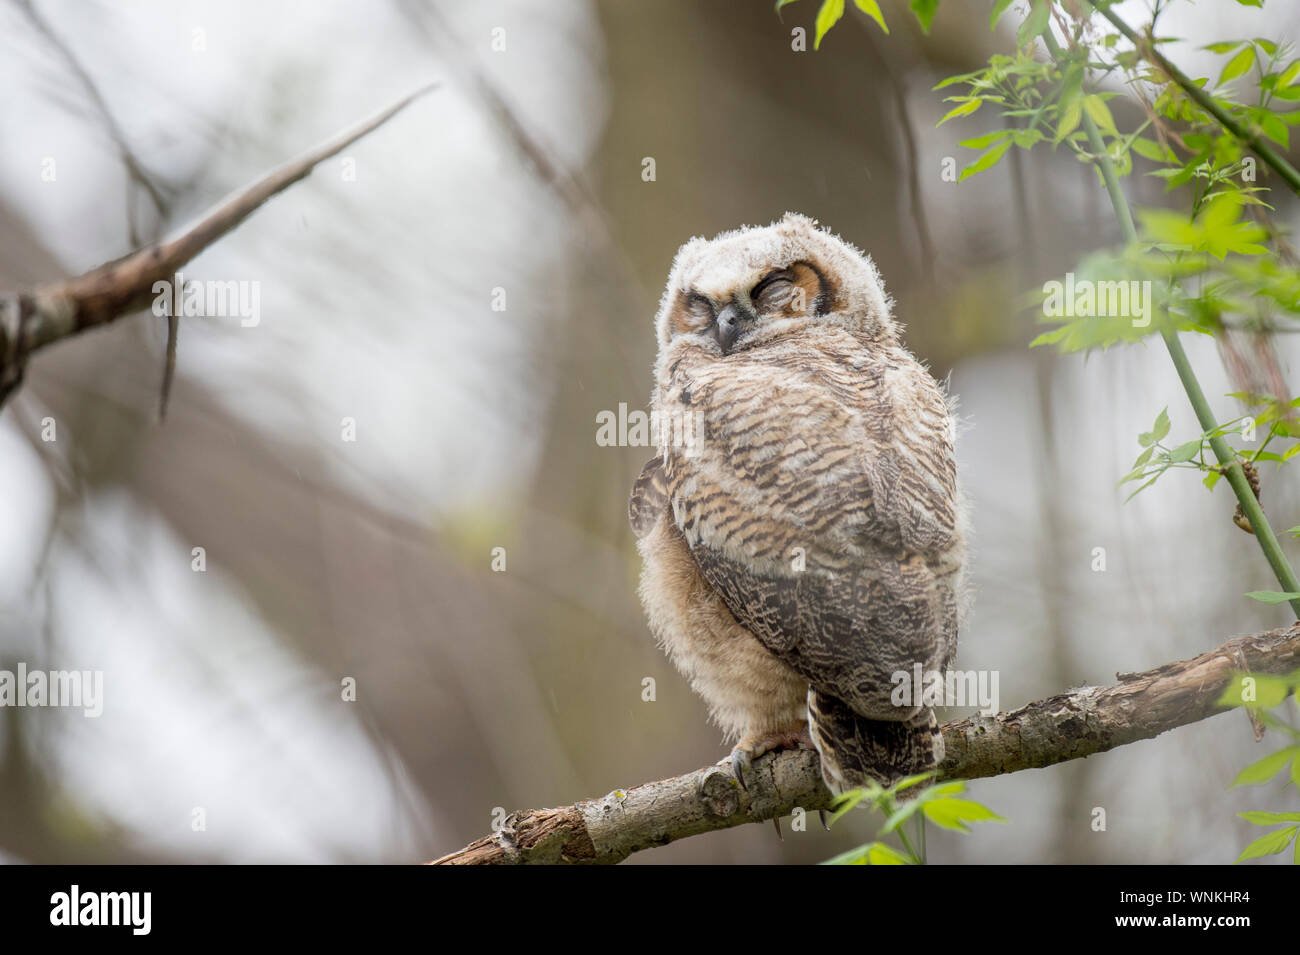 A sleeping Great-horned Owlet rests on a branch in the forest in soft overcast light. Stock Photo